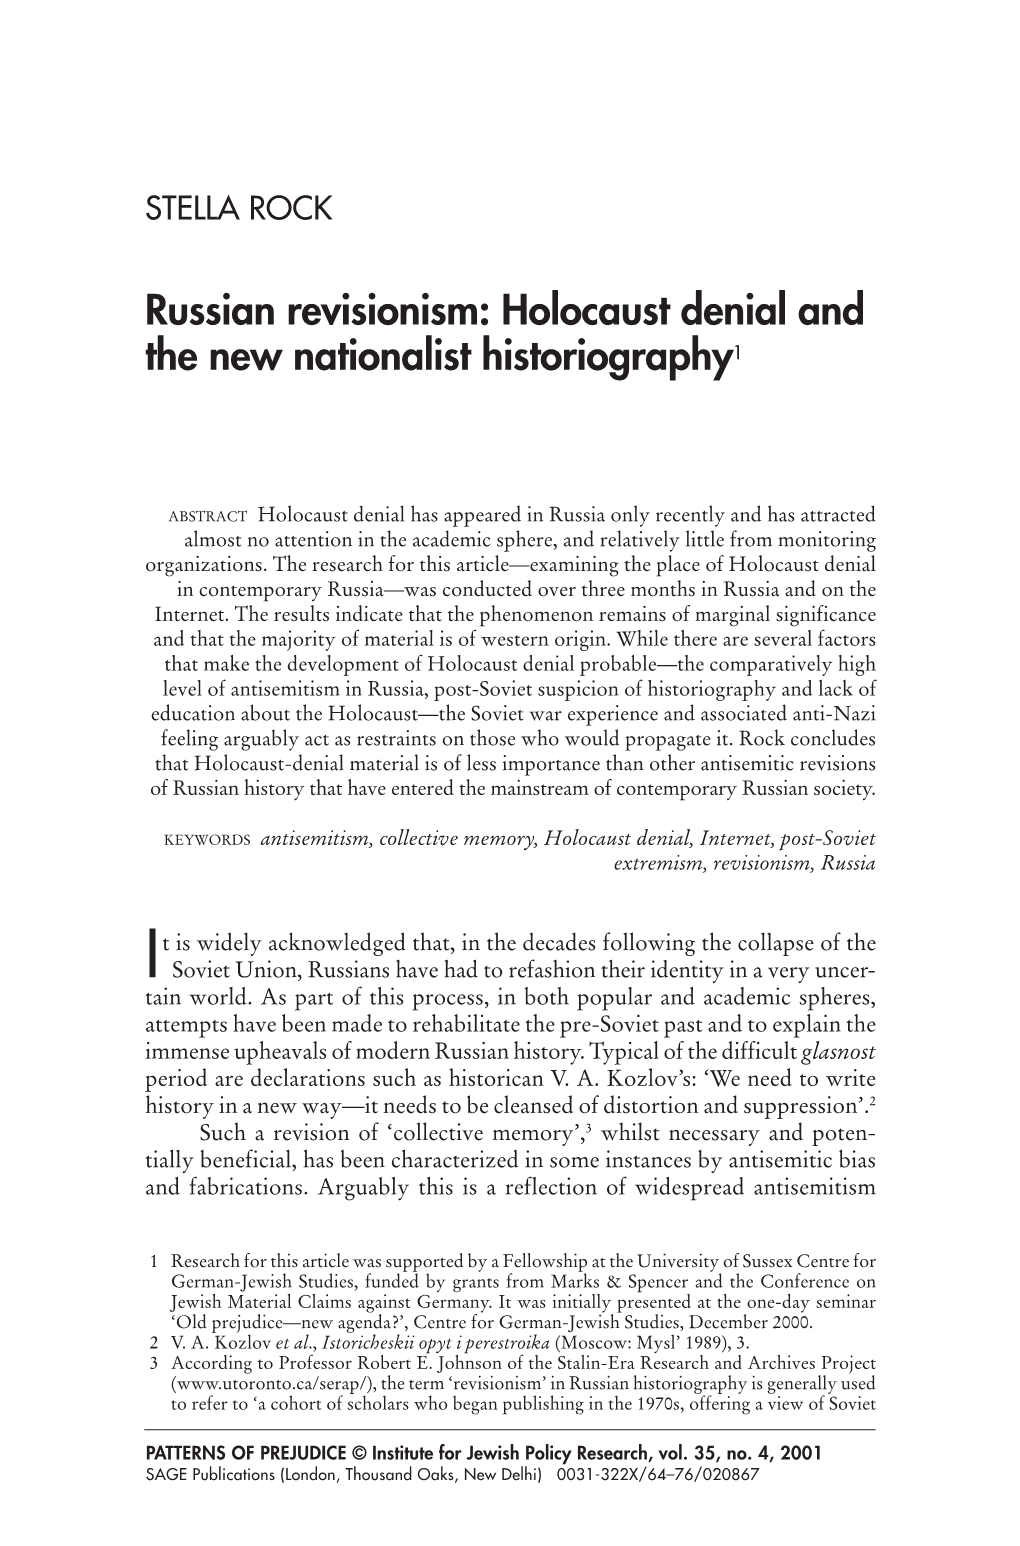 Russian Revisionism: Holocaust Denial and the New Nationalist Historiography1